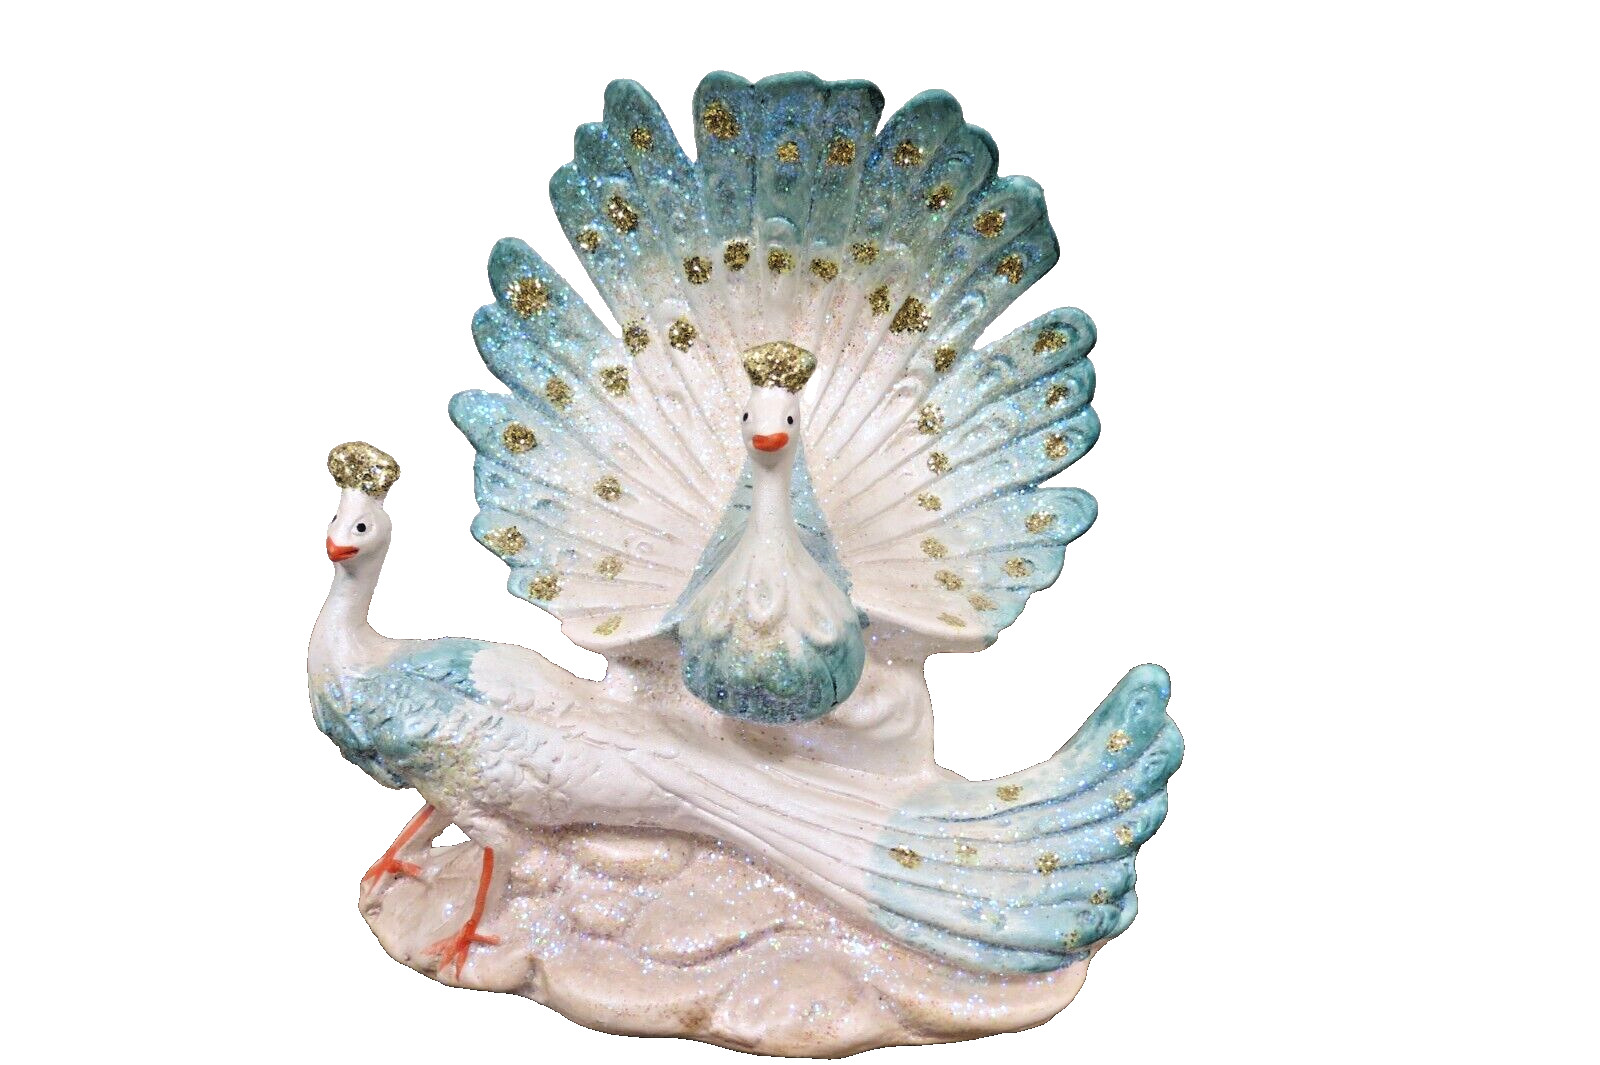 Vintage Capodimonte Porcelain Peacock Figurine - Blue And Gold Glitter Accents